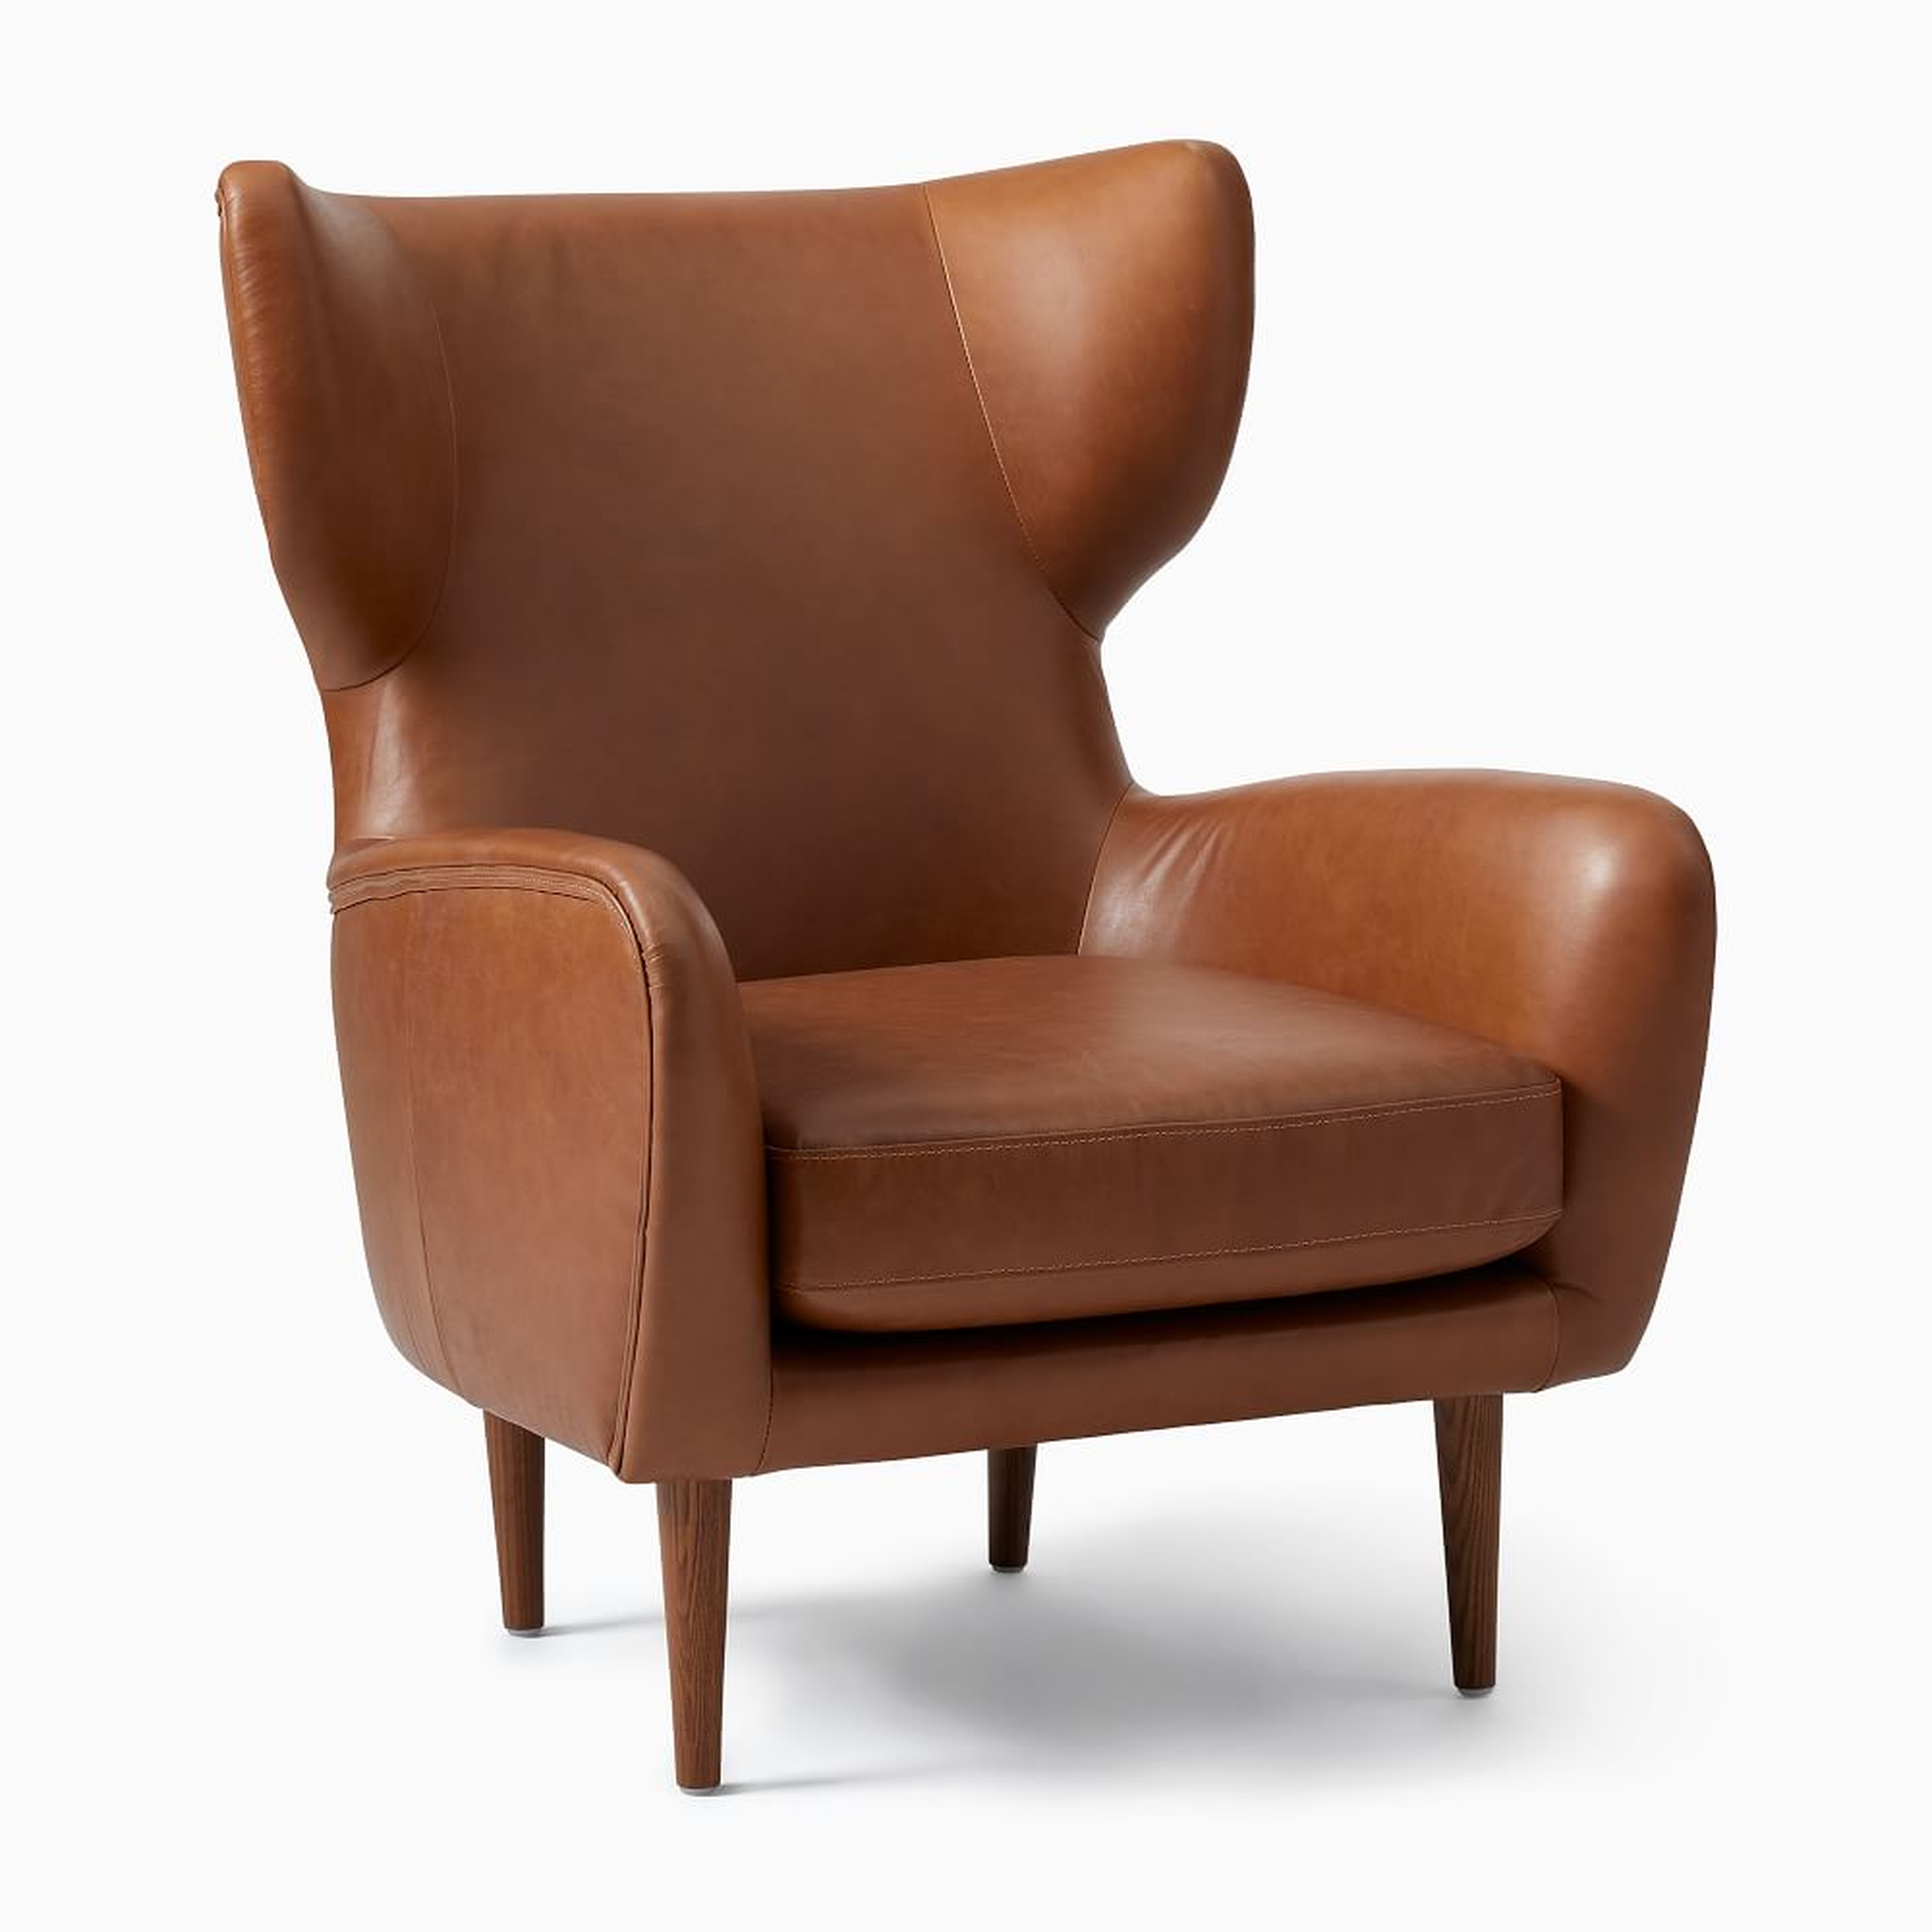 Lucia Chair, Poly, Saddle Leather, Nut, Cool Walnut - West Elm